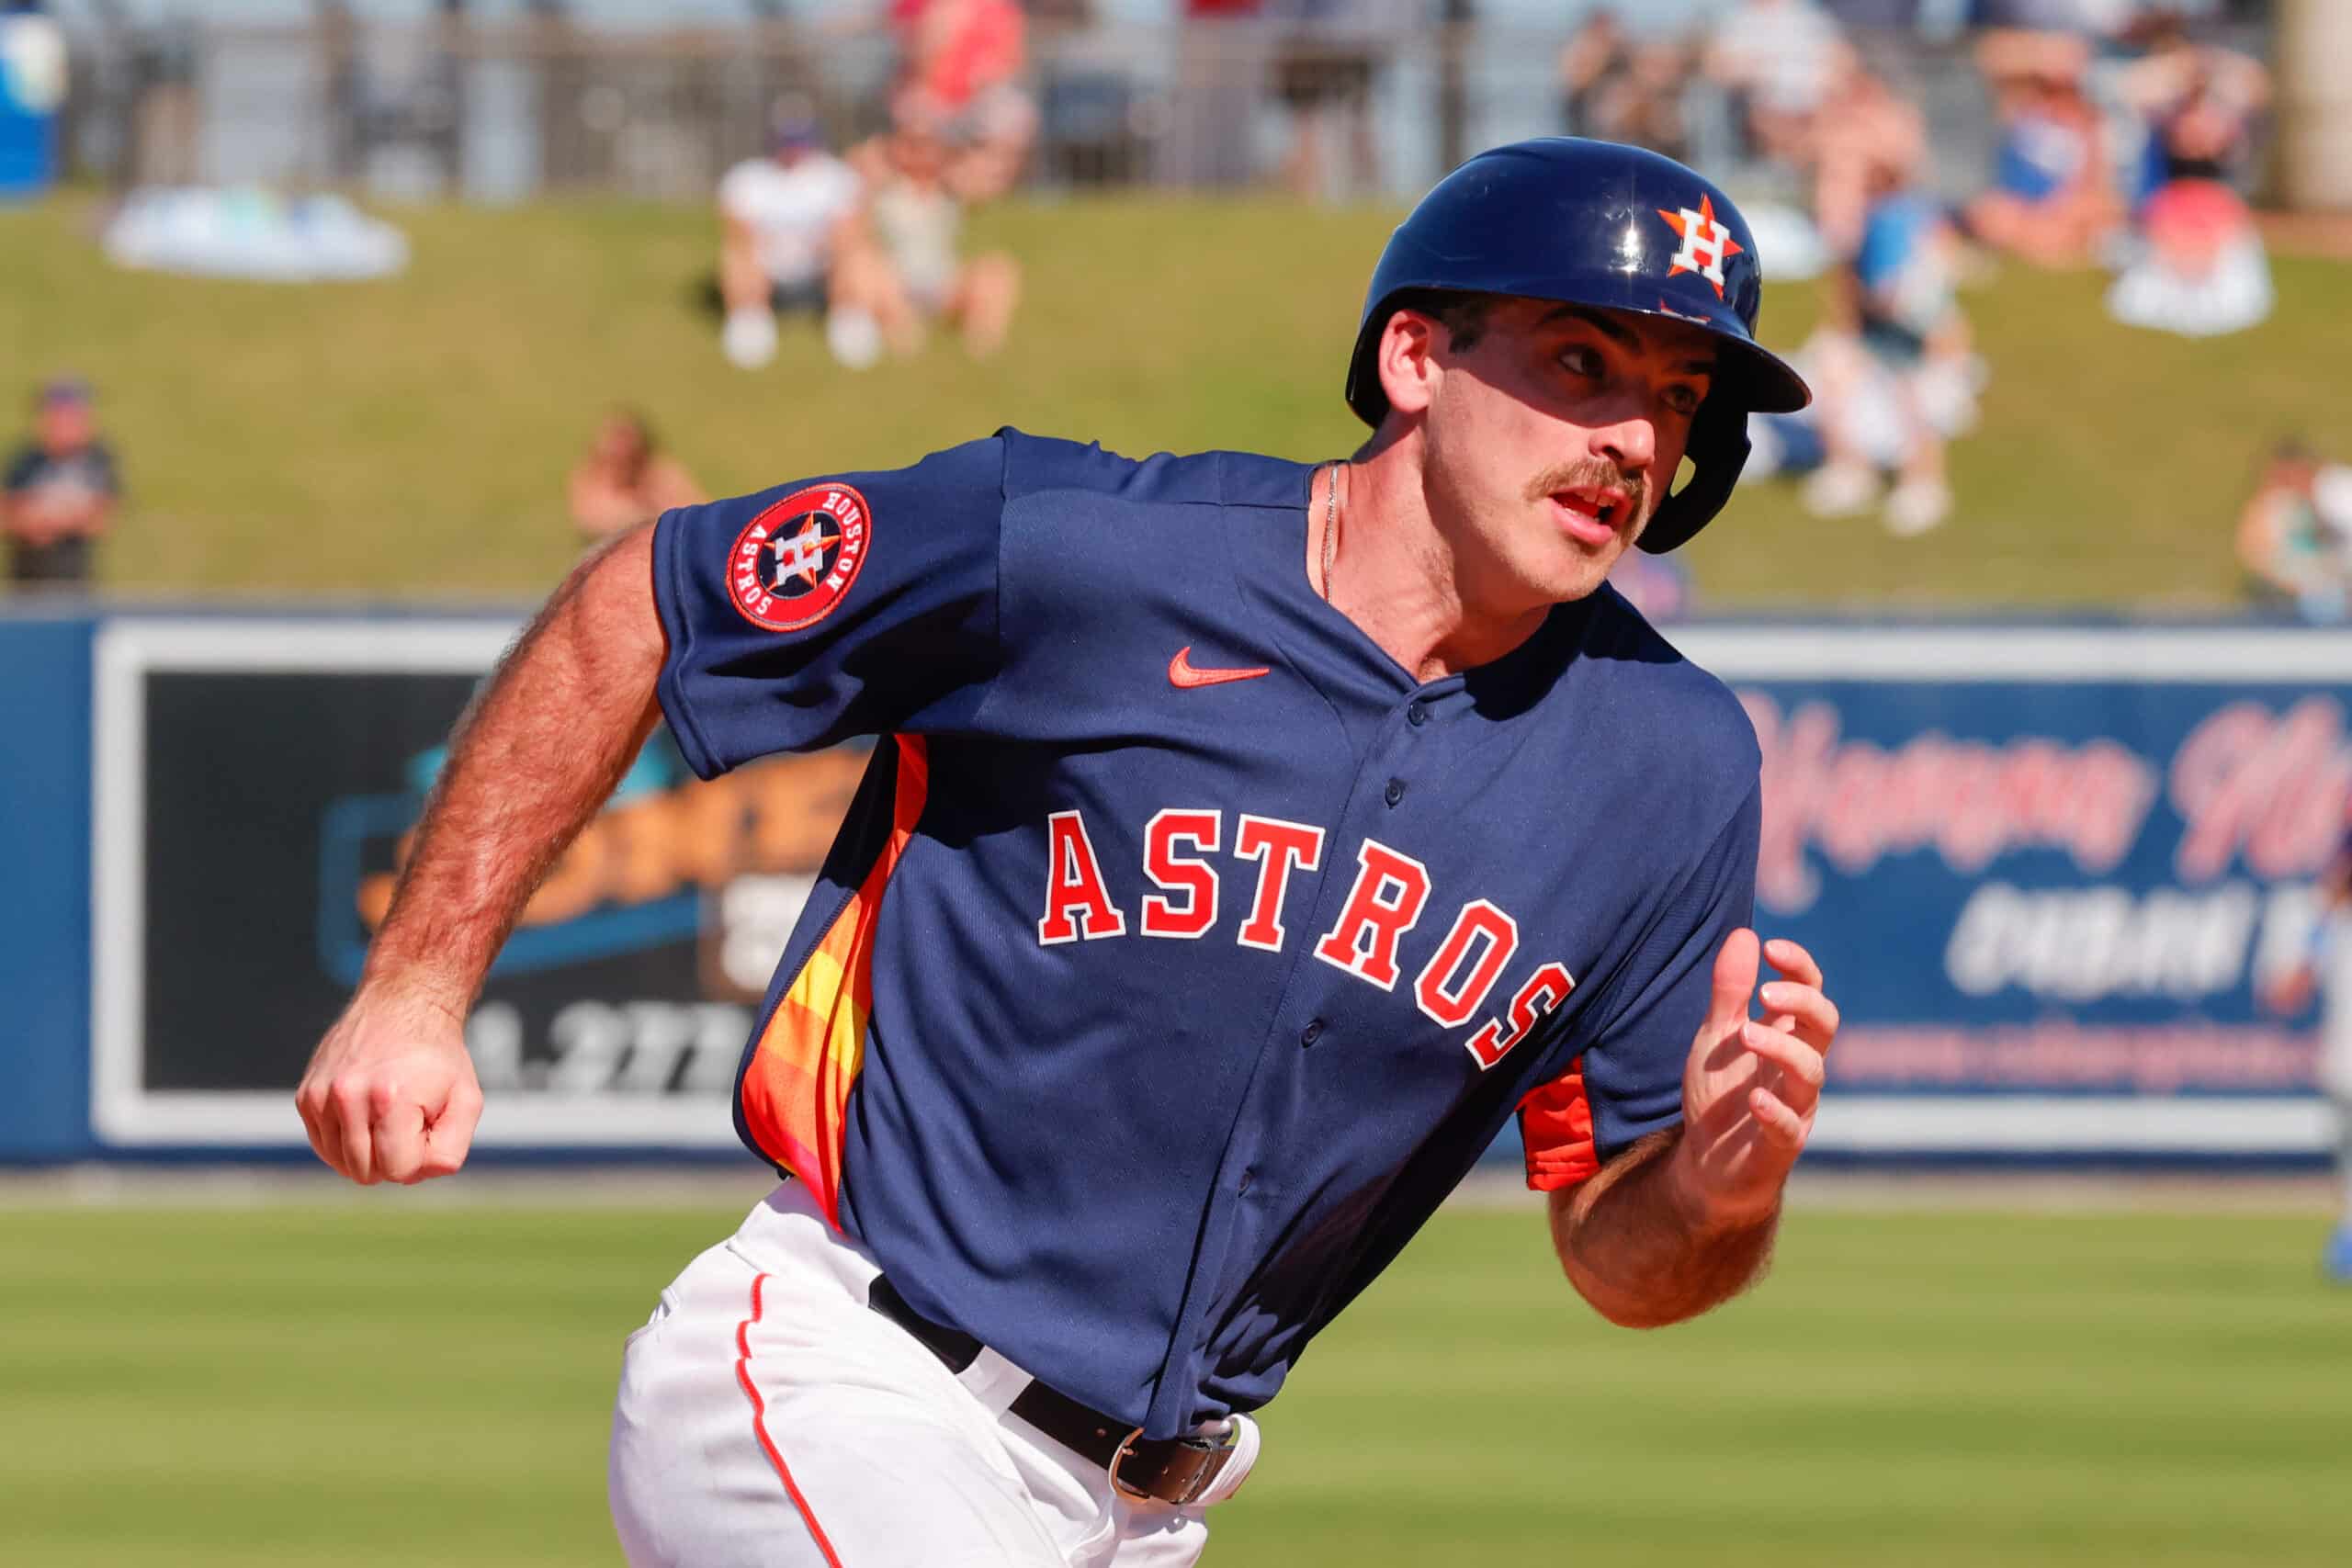 Feb 25, 2023; West Palm Beach, Florida, USA; Houston Astros outfielder Scott Schreiber rounds third base during the seventh inning against the New York Mets at The Ballpark of the Palm Beaches.